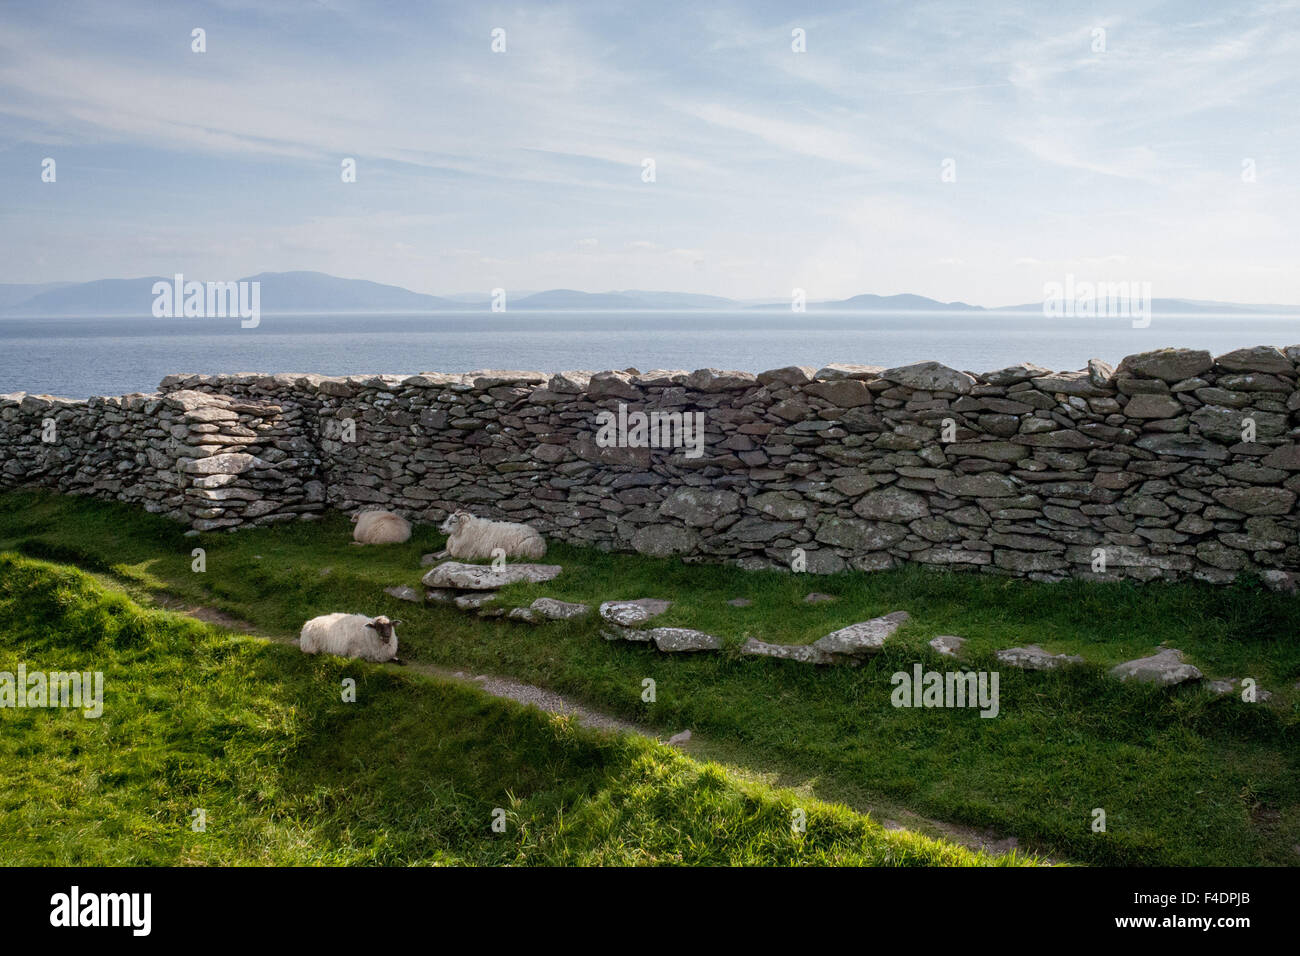 Sheep sleeping in the shade of Dún Beag Fort Visitor Center, a Promontory Fort in the county Dingle, Ireland Stock Photo